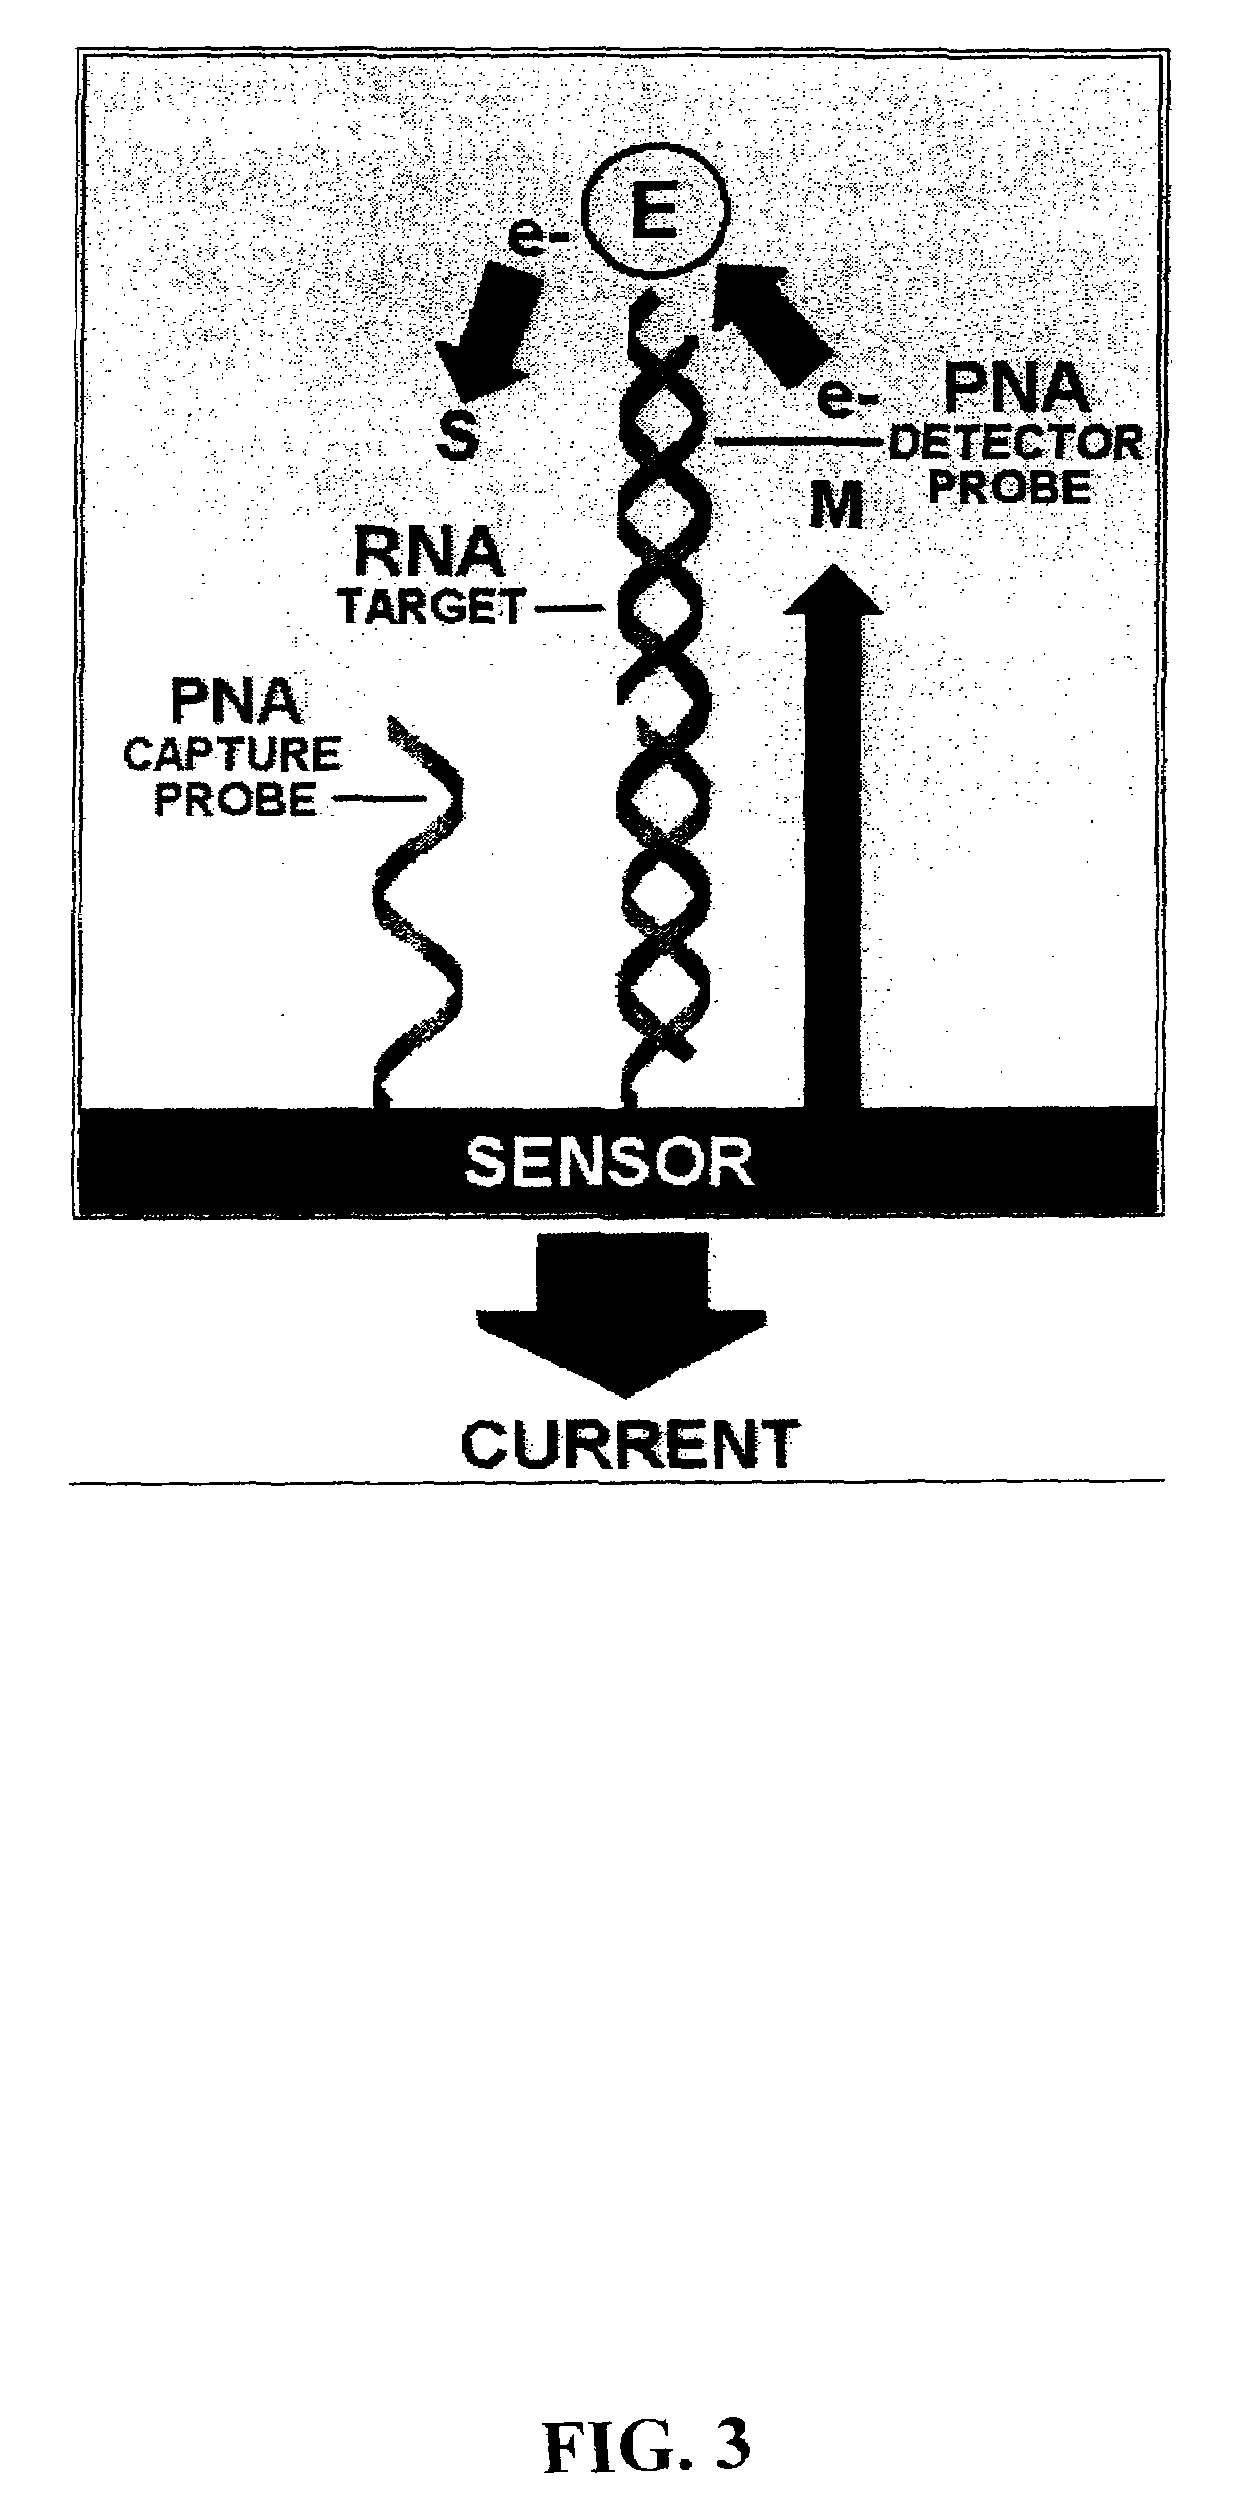 Electrochemical detection of nucleic acid sequences